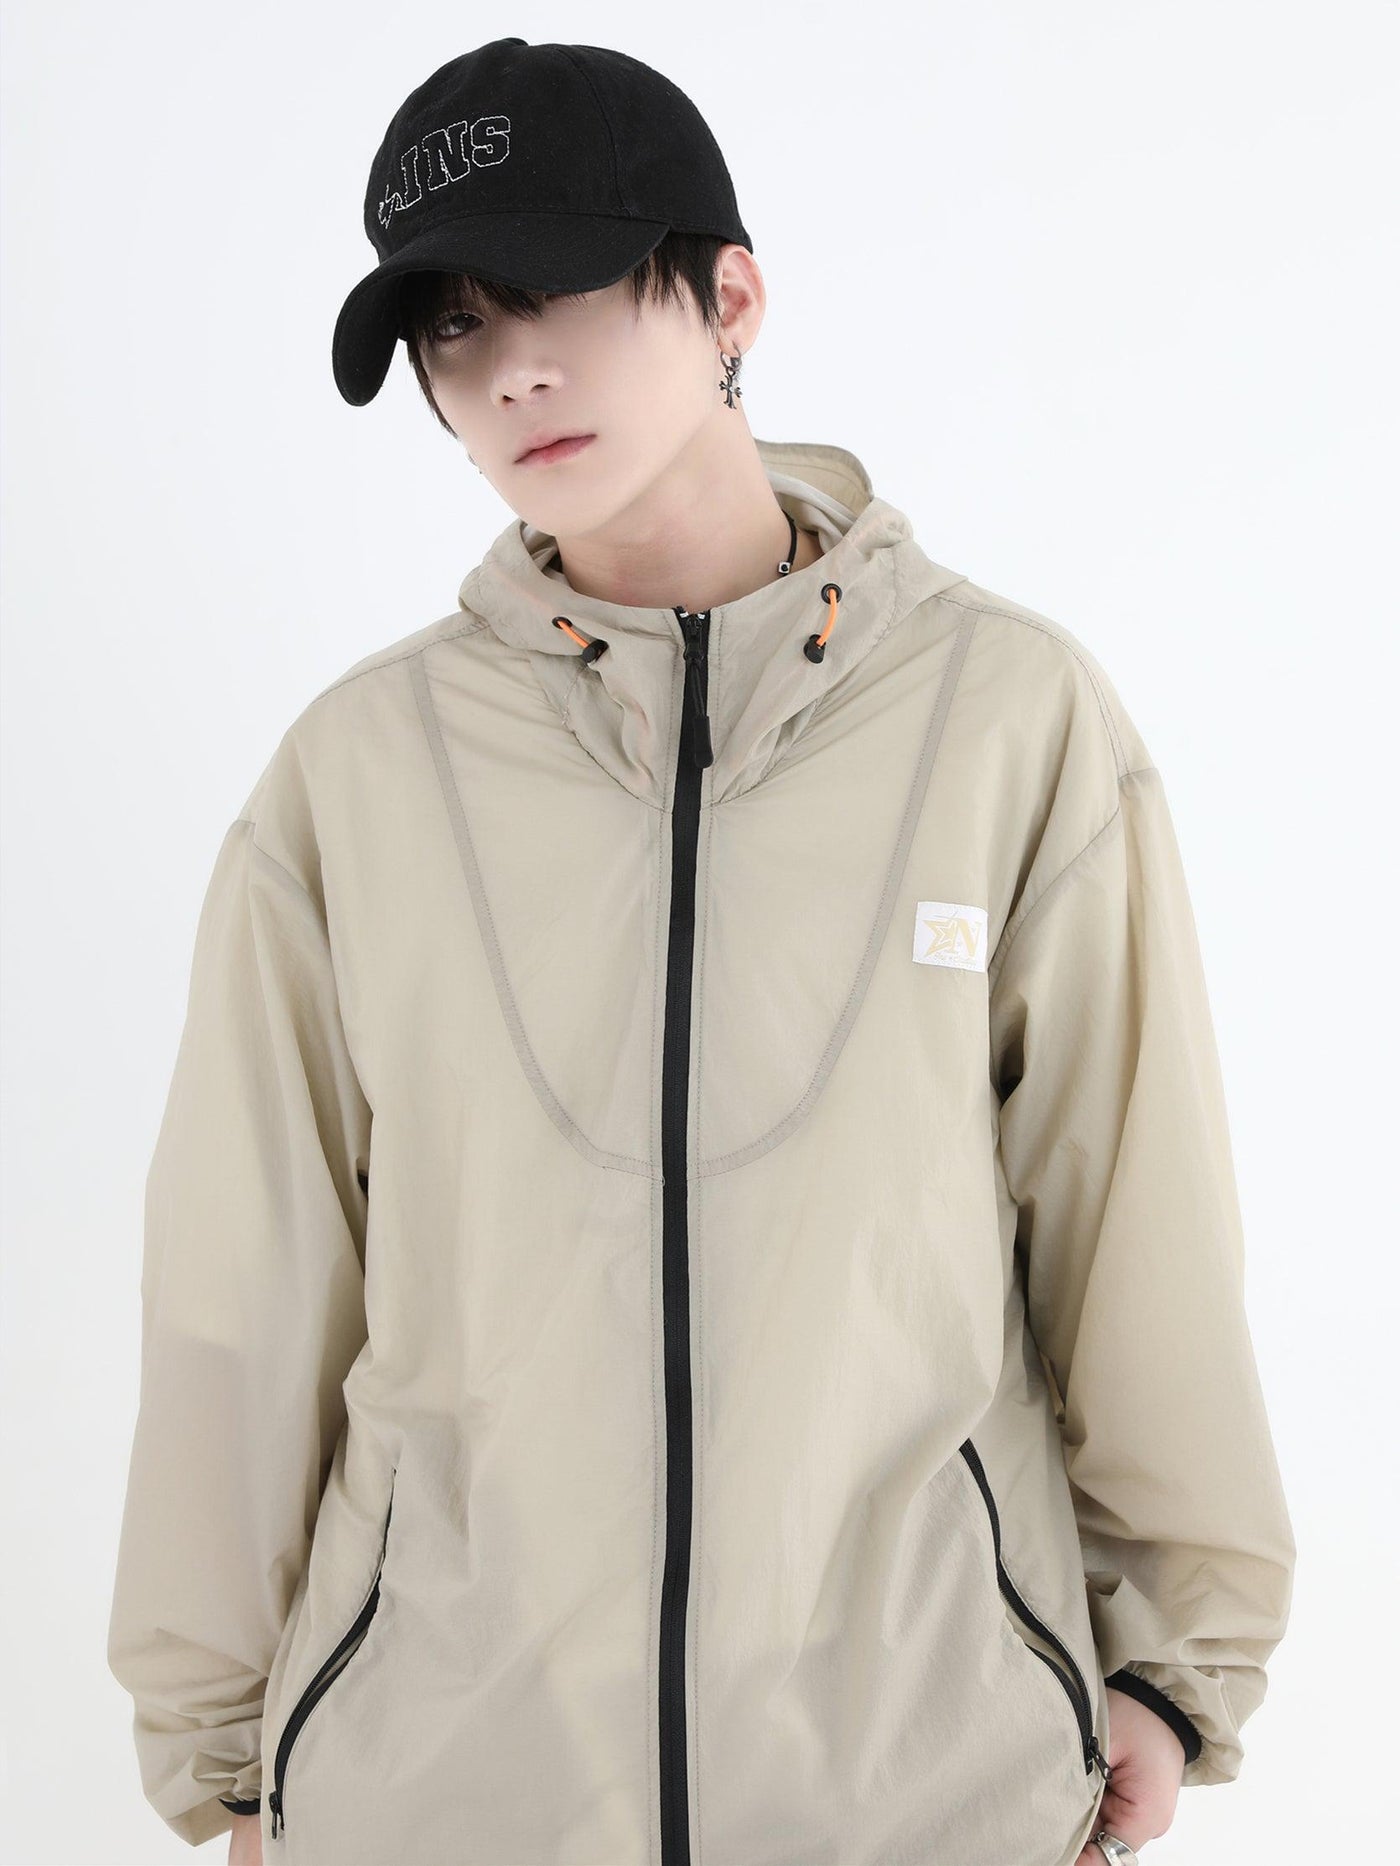 Breathable Camping Style Hoodie Korean Street Fashion Hoodie By INS Korea Shop Online at OH Vault